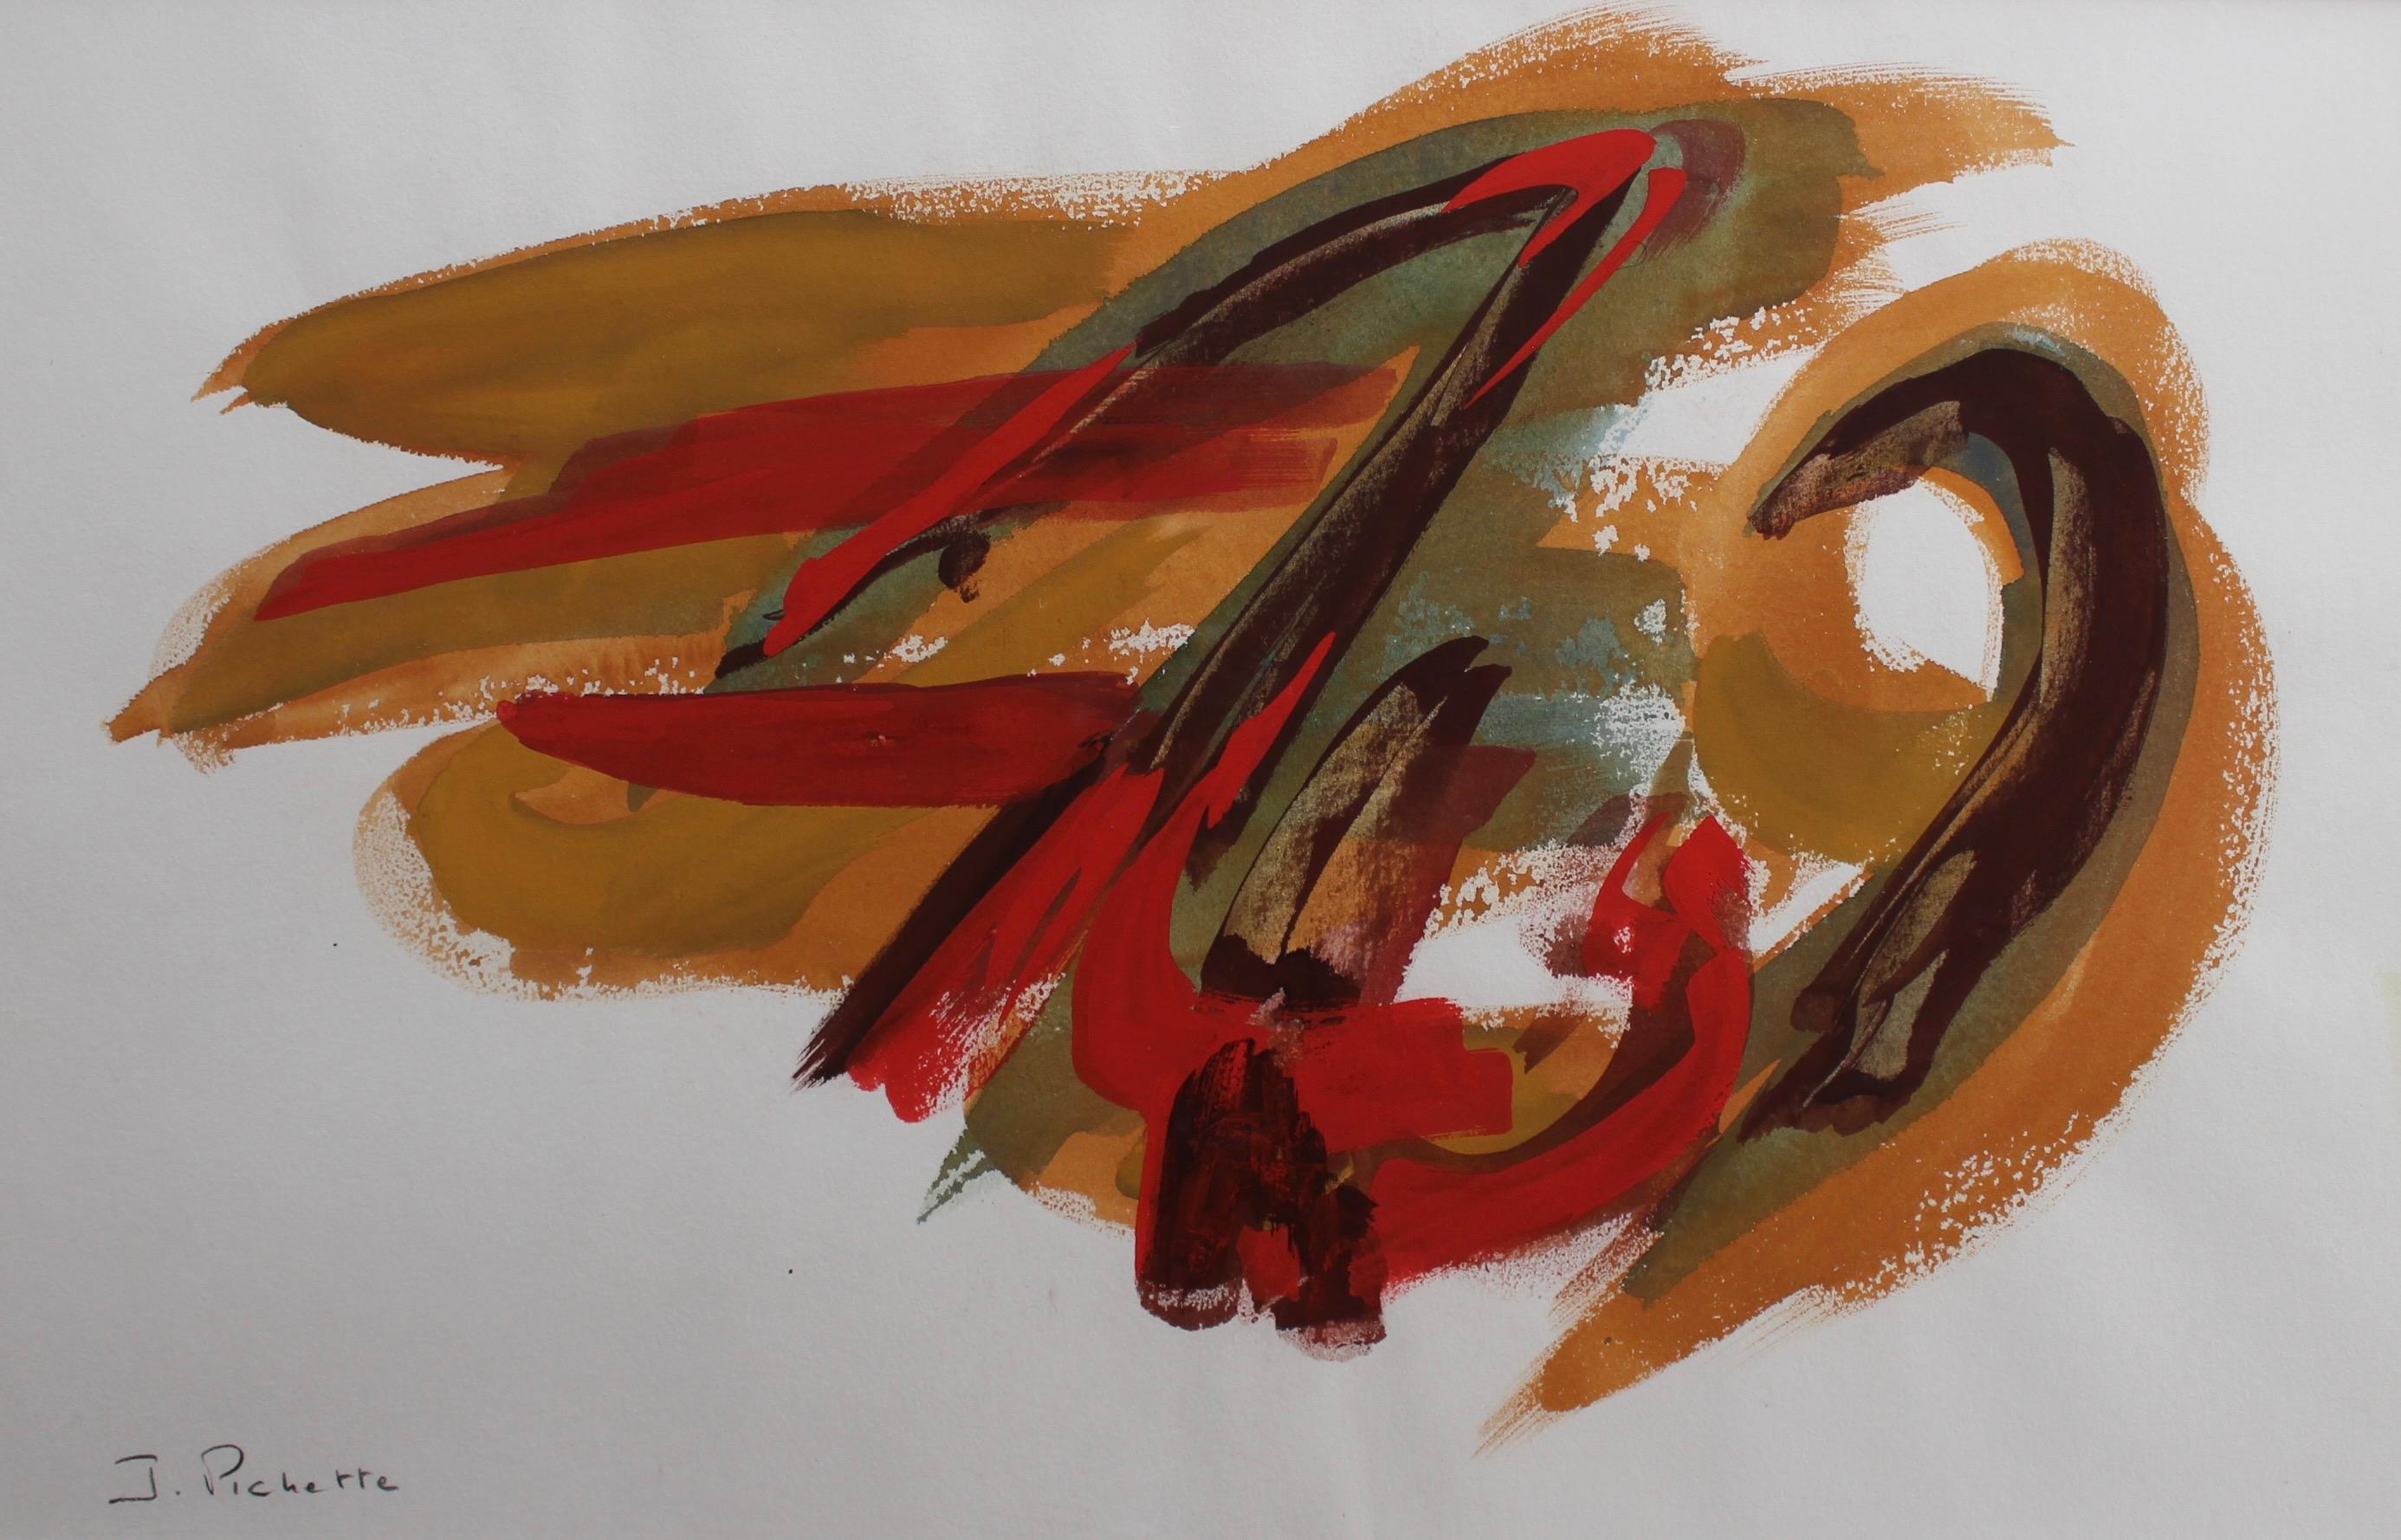 James Pichette Abstract Drawing - Composition in Orange and Red